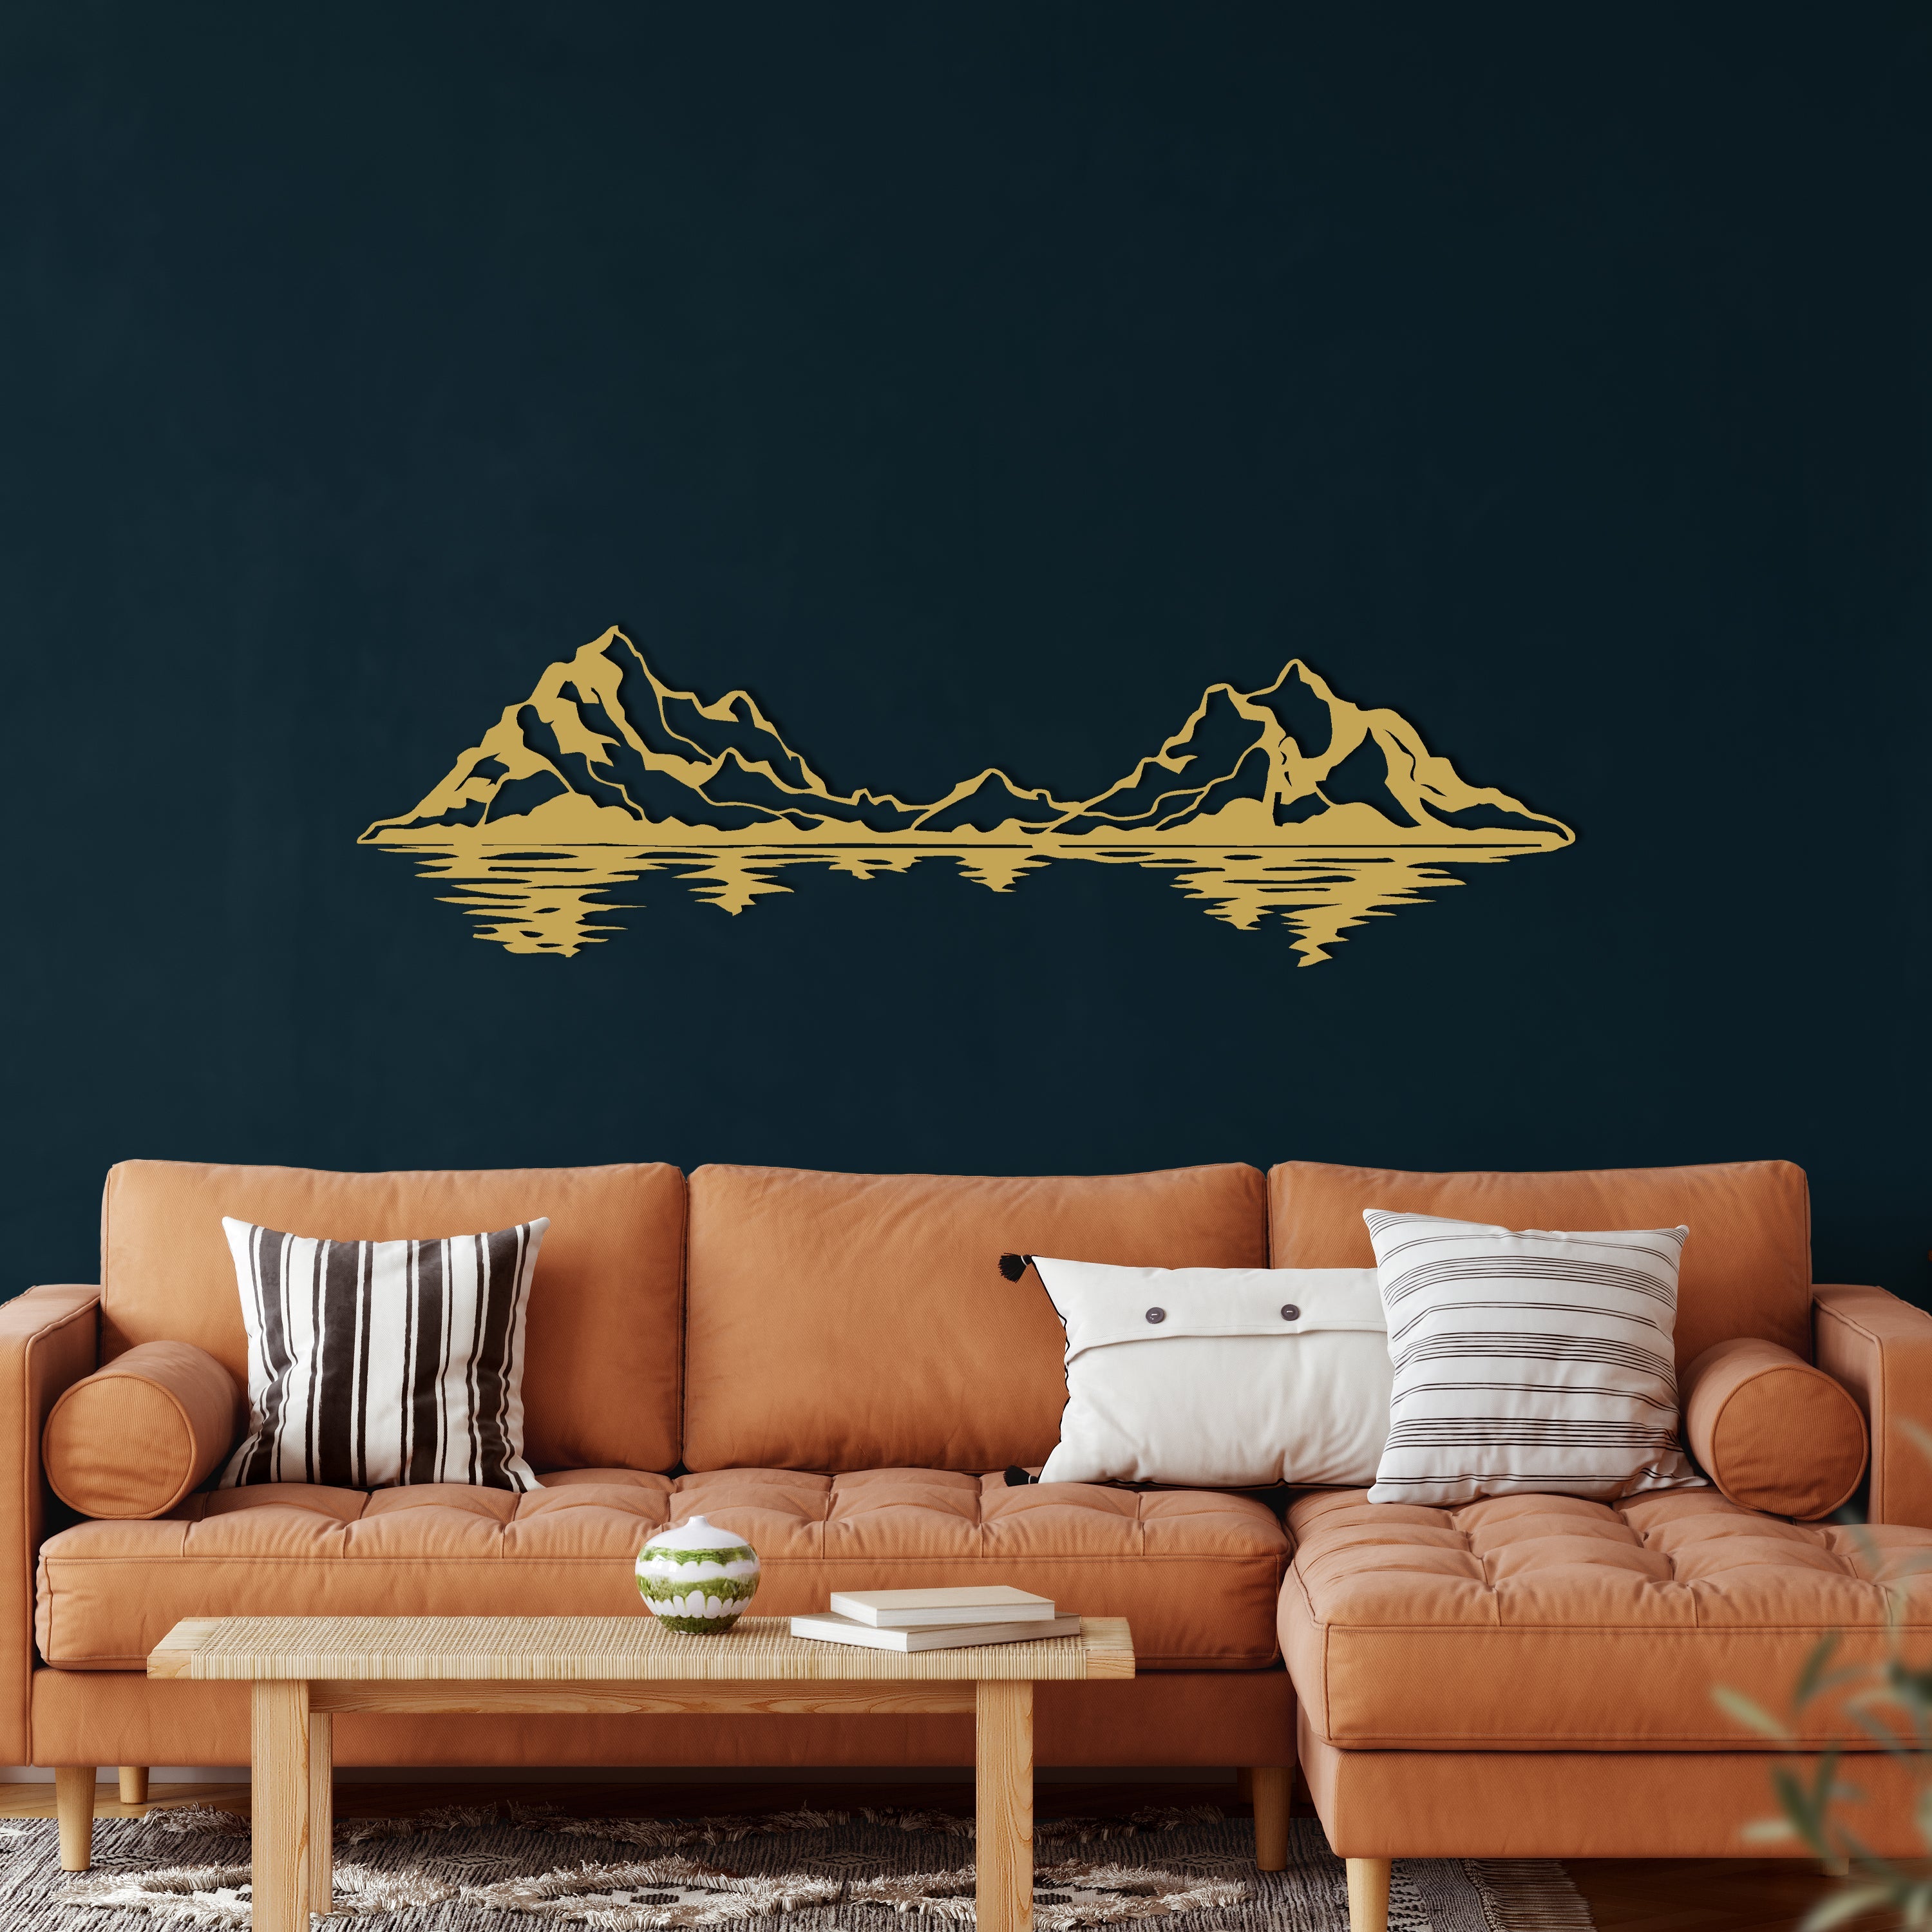 Mountain and Lake Metal Wall Decor Without A Frame